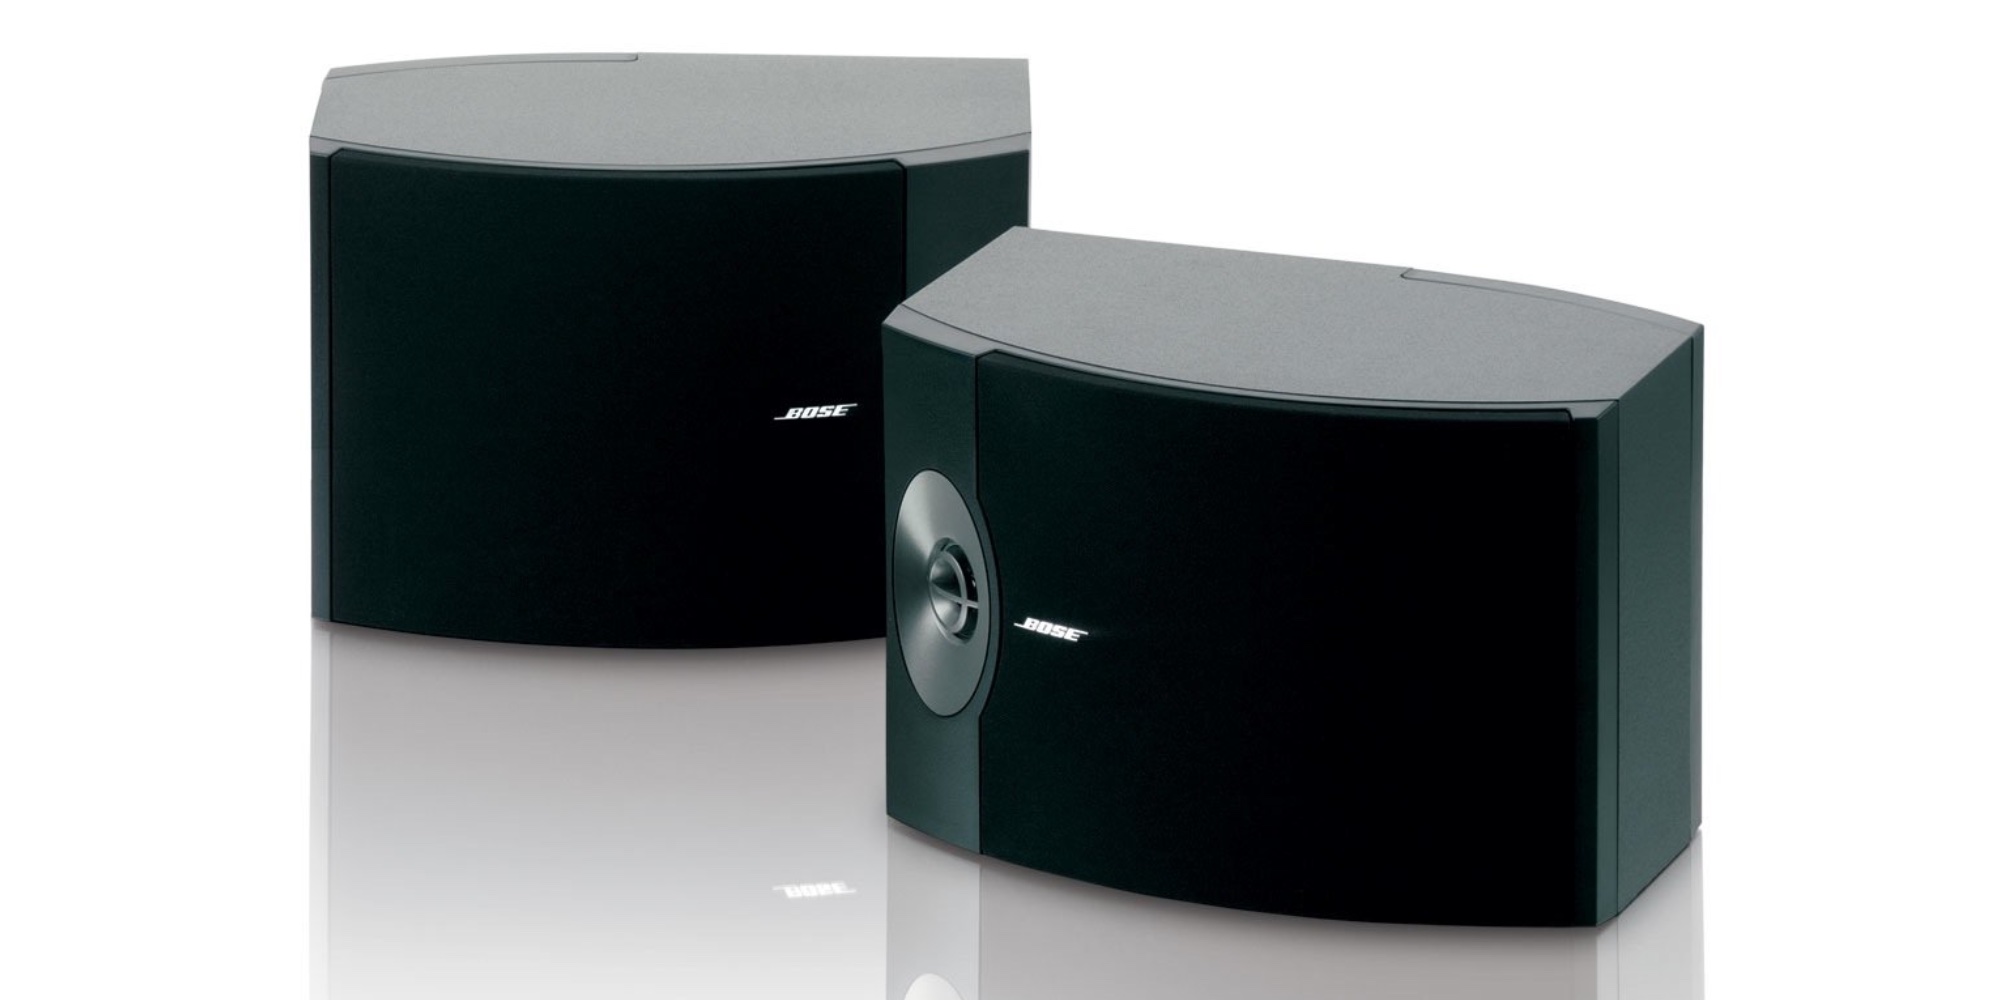 Score a pair of Bose 301-V Stereo Loudspeakers at a new Amazon low